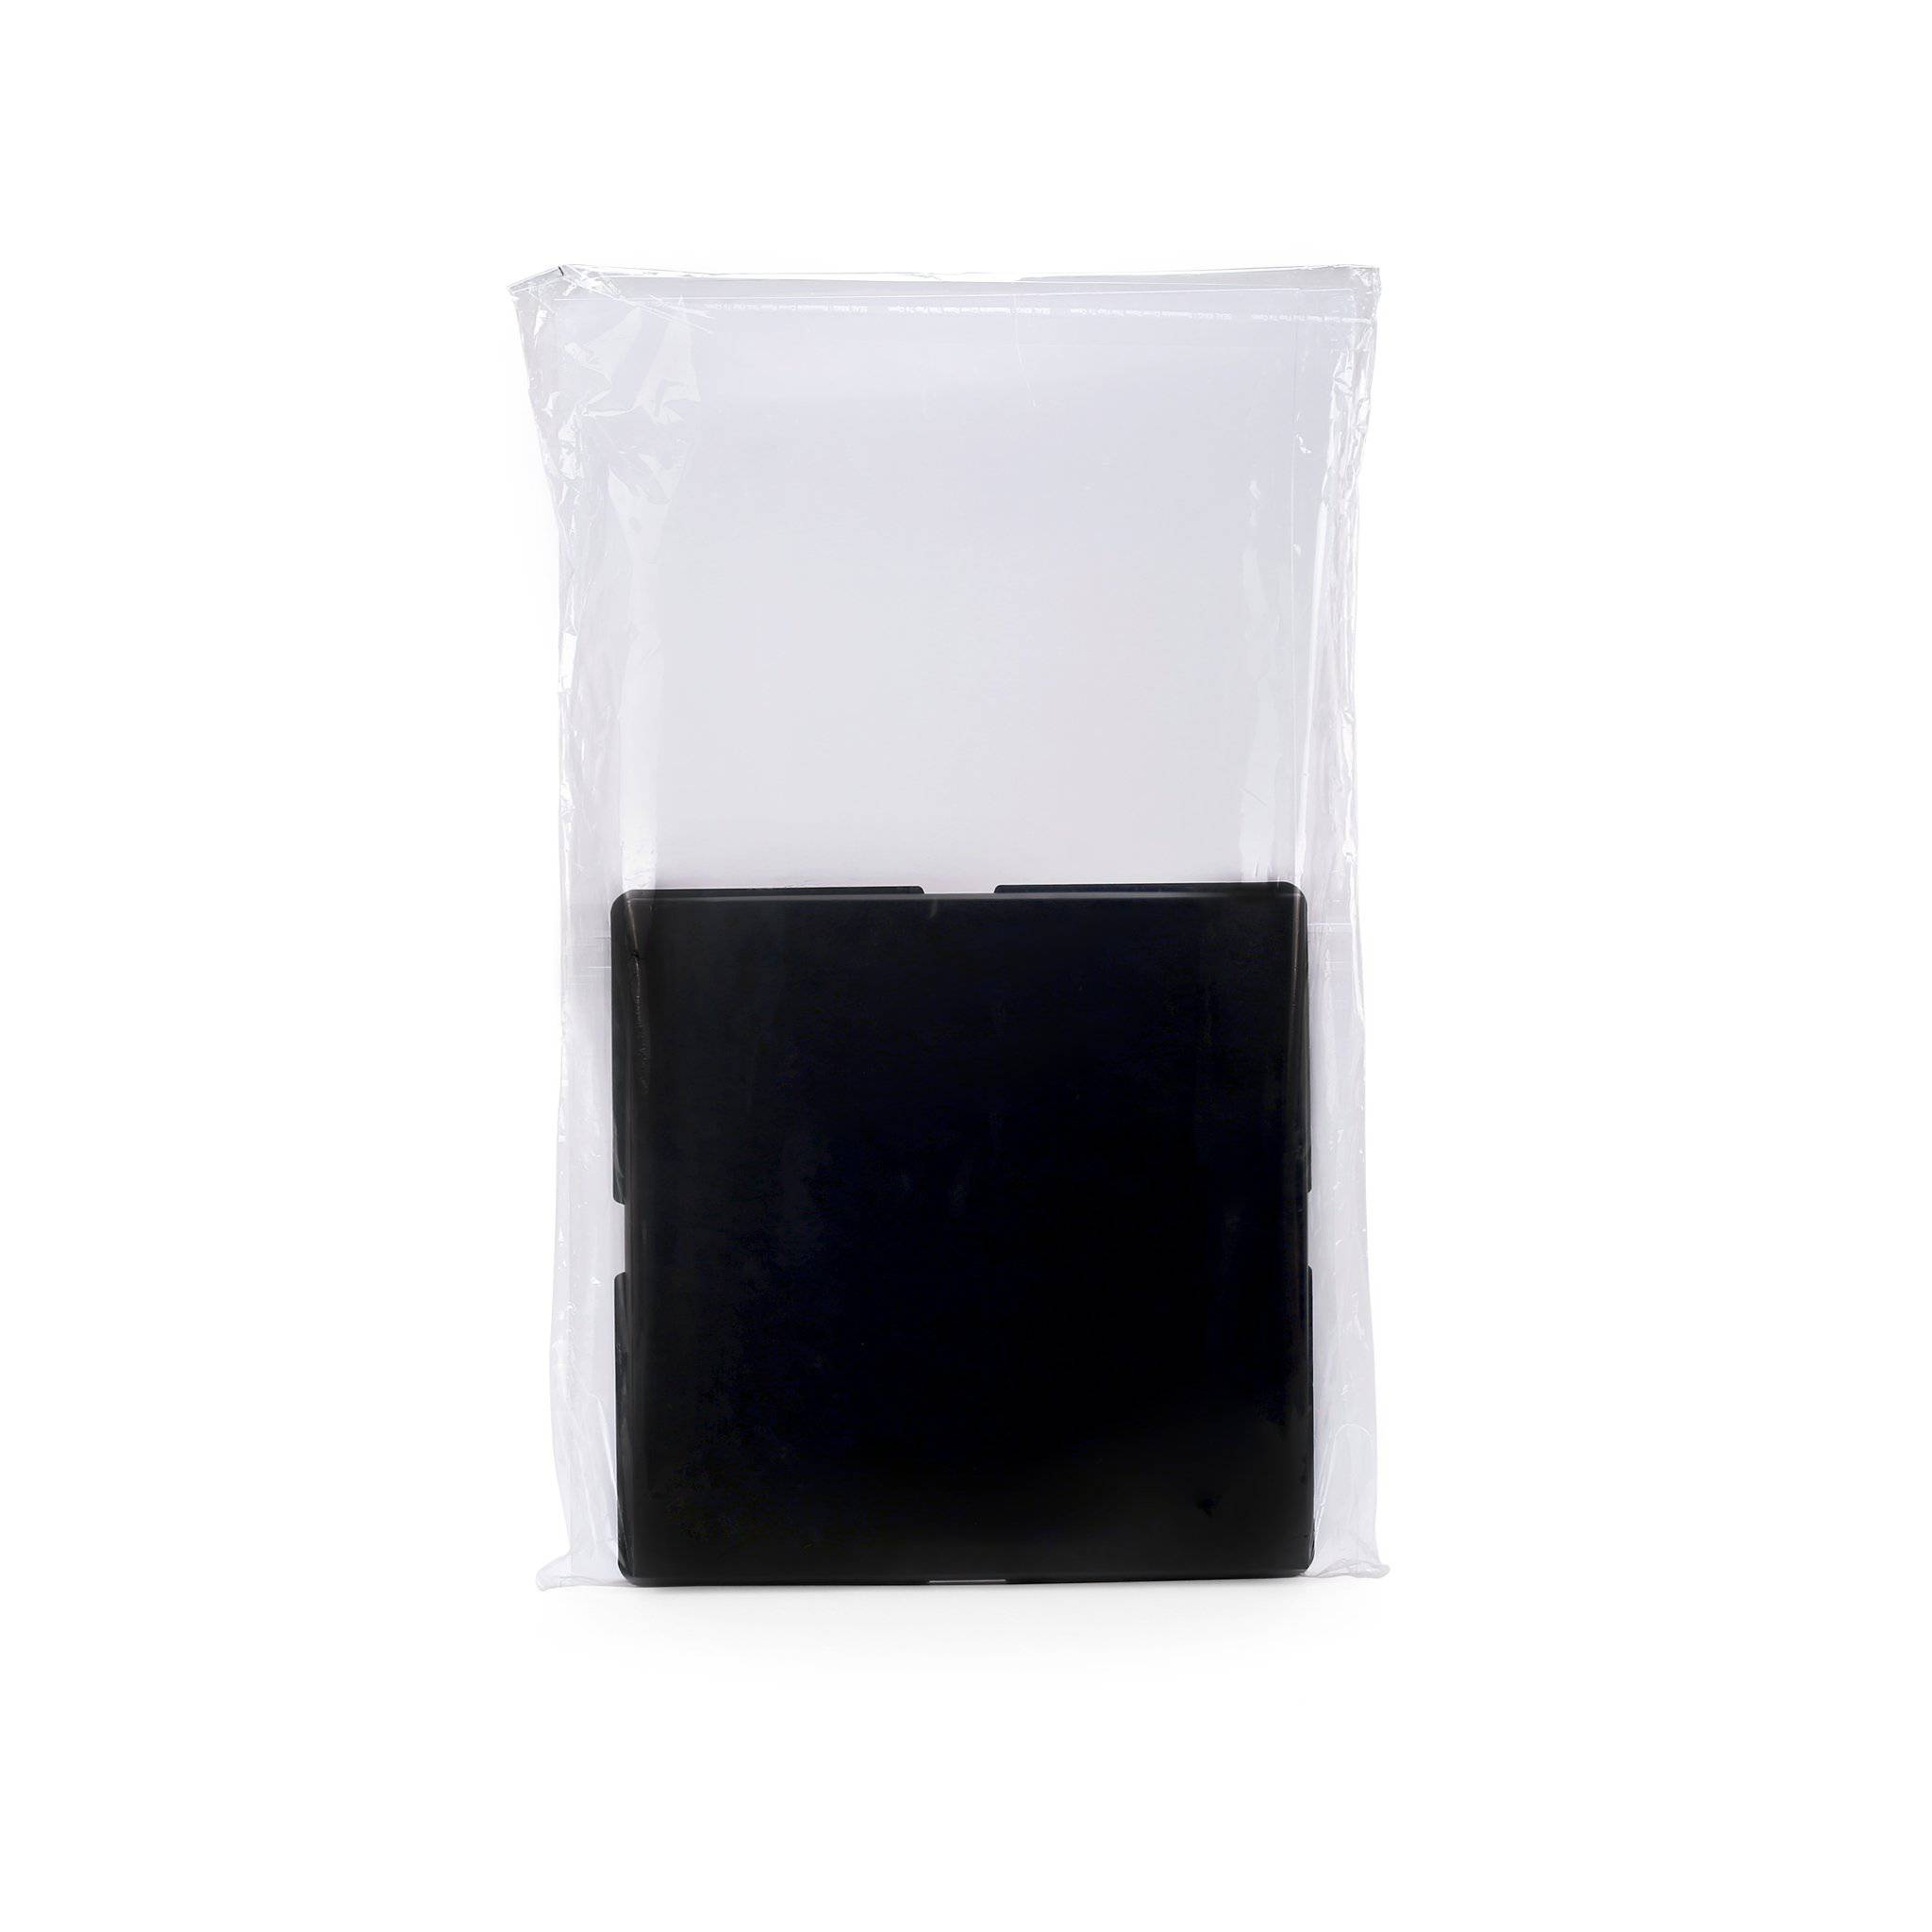 Tall Transparent Cake Box With Black Base 1 Piece - Hotpack Global